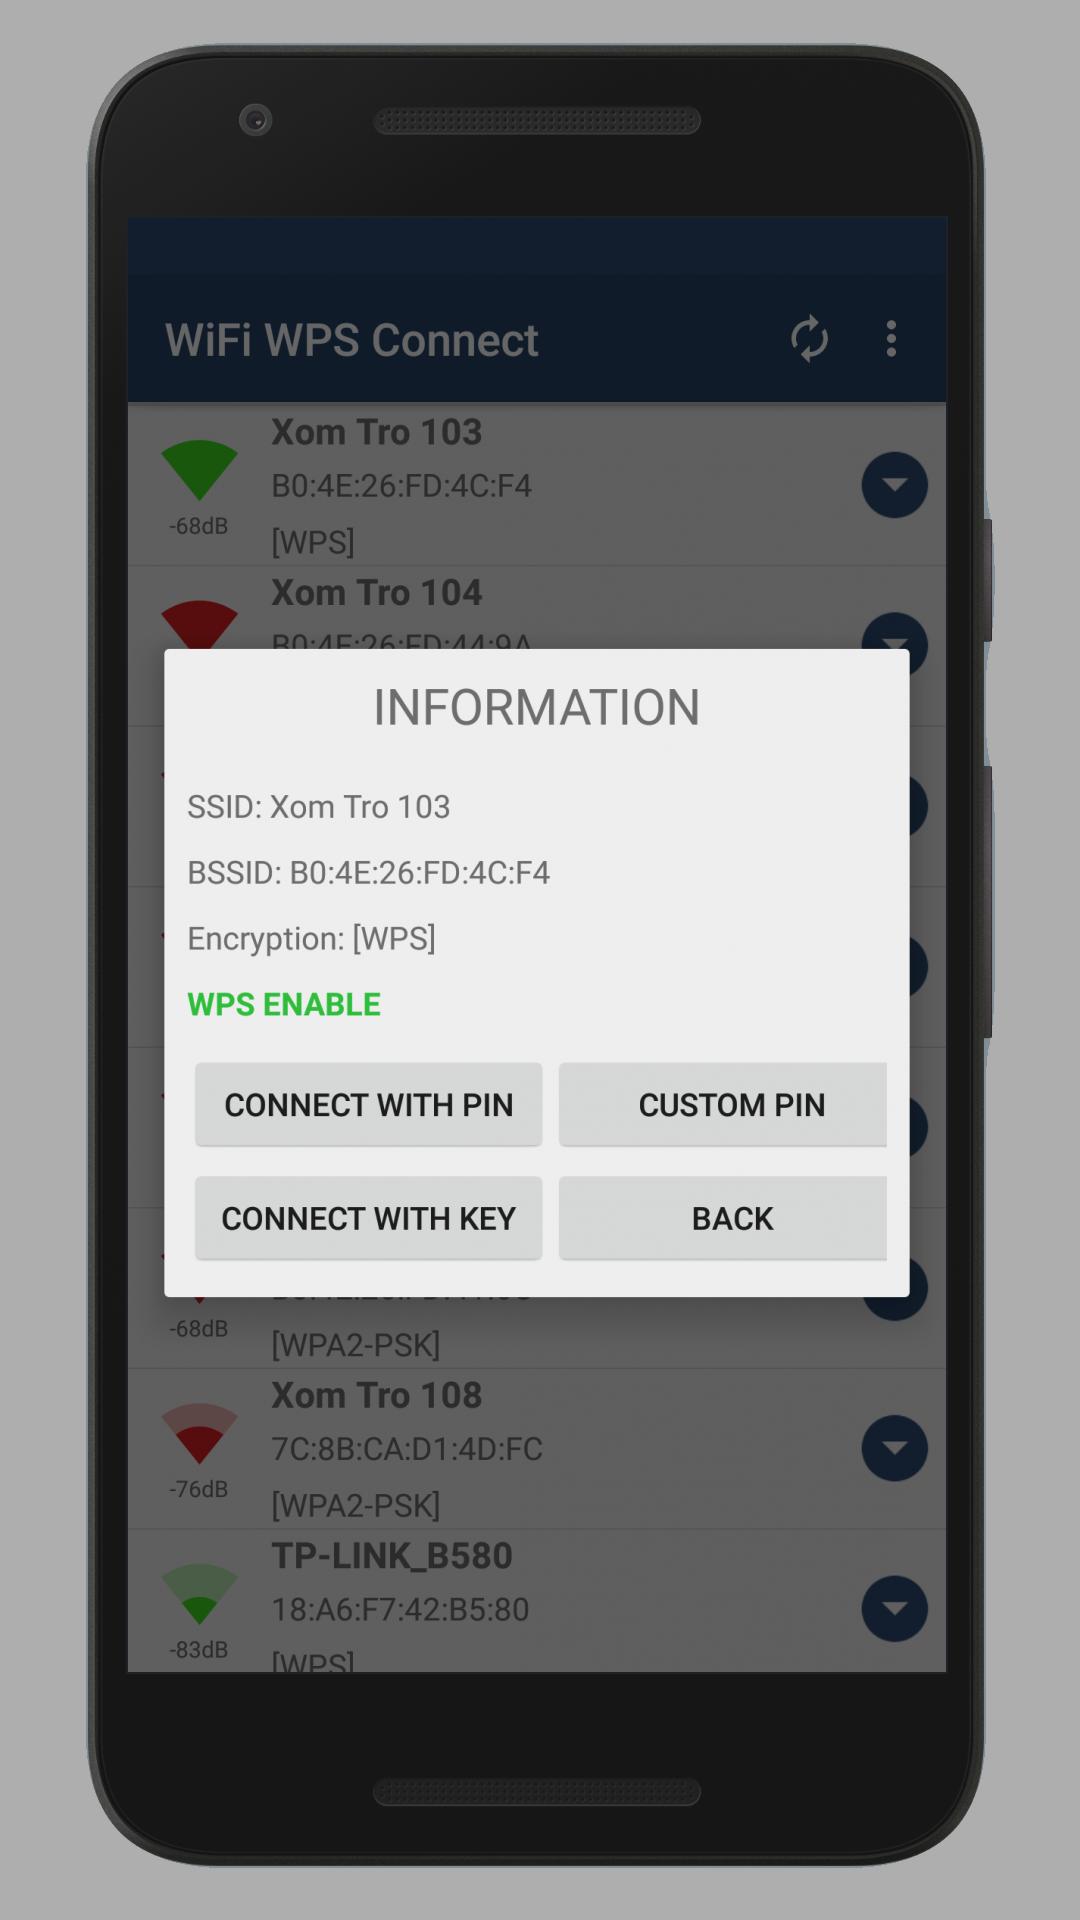 Wps connect ru. WPS connect. WIFI WPS Android. WPS WIFI Checker Pro. WPS connect Pro APK.